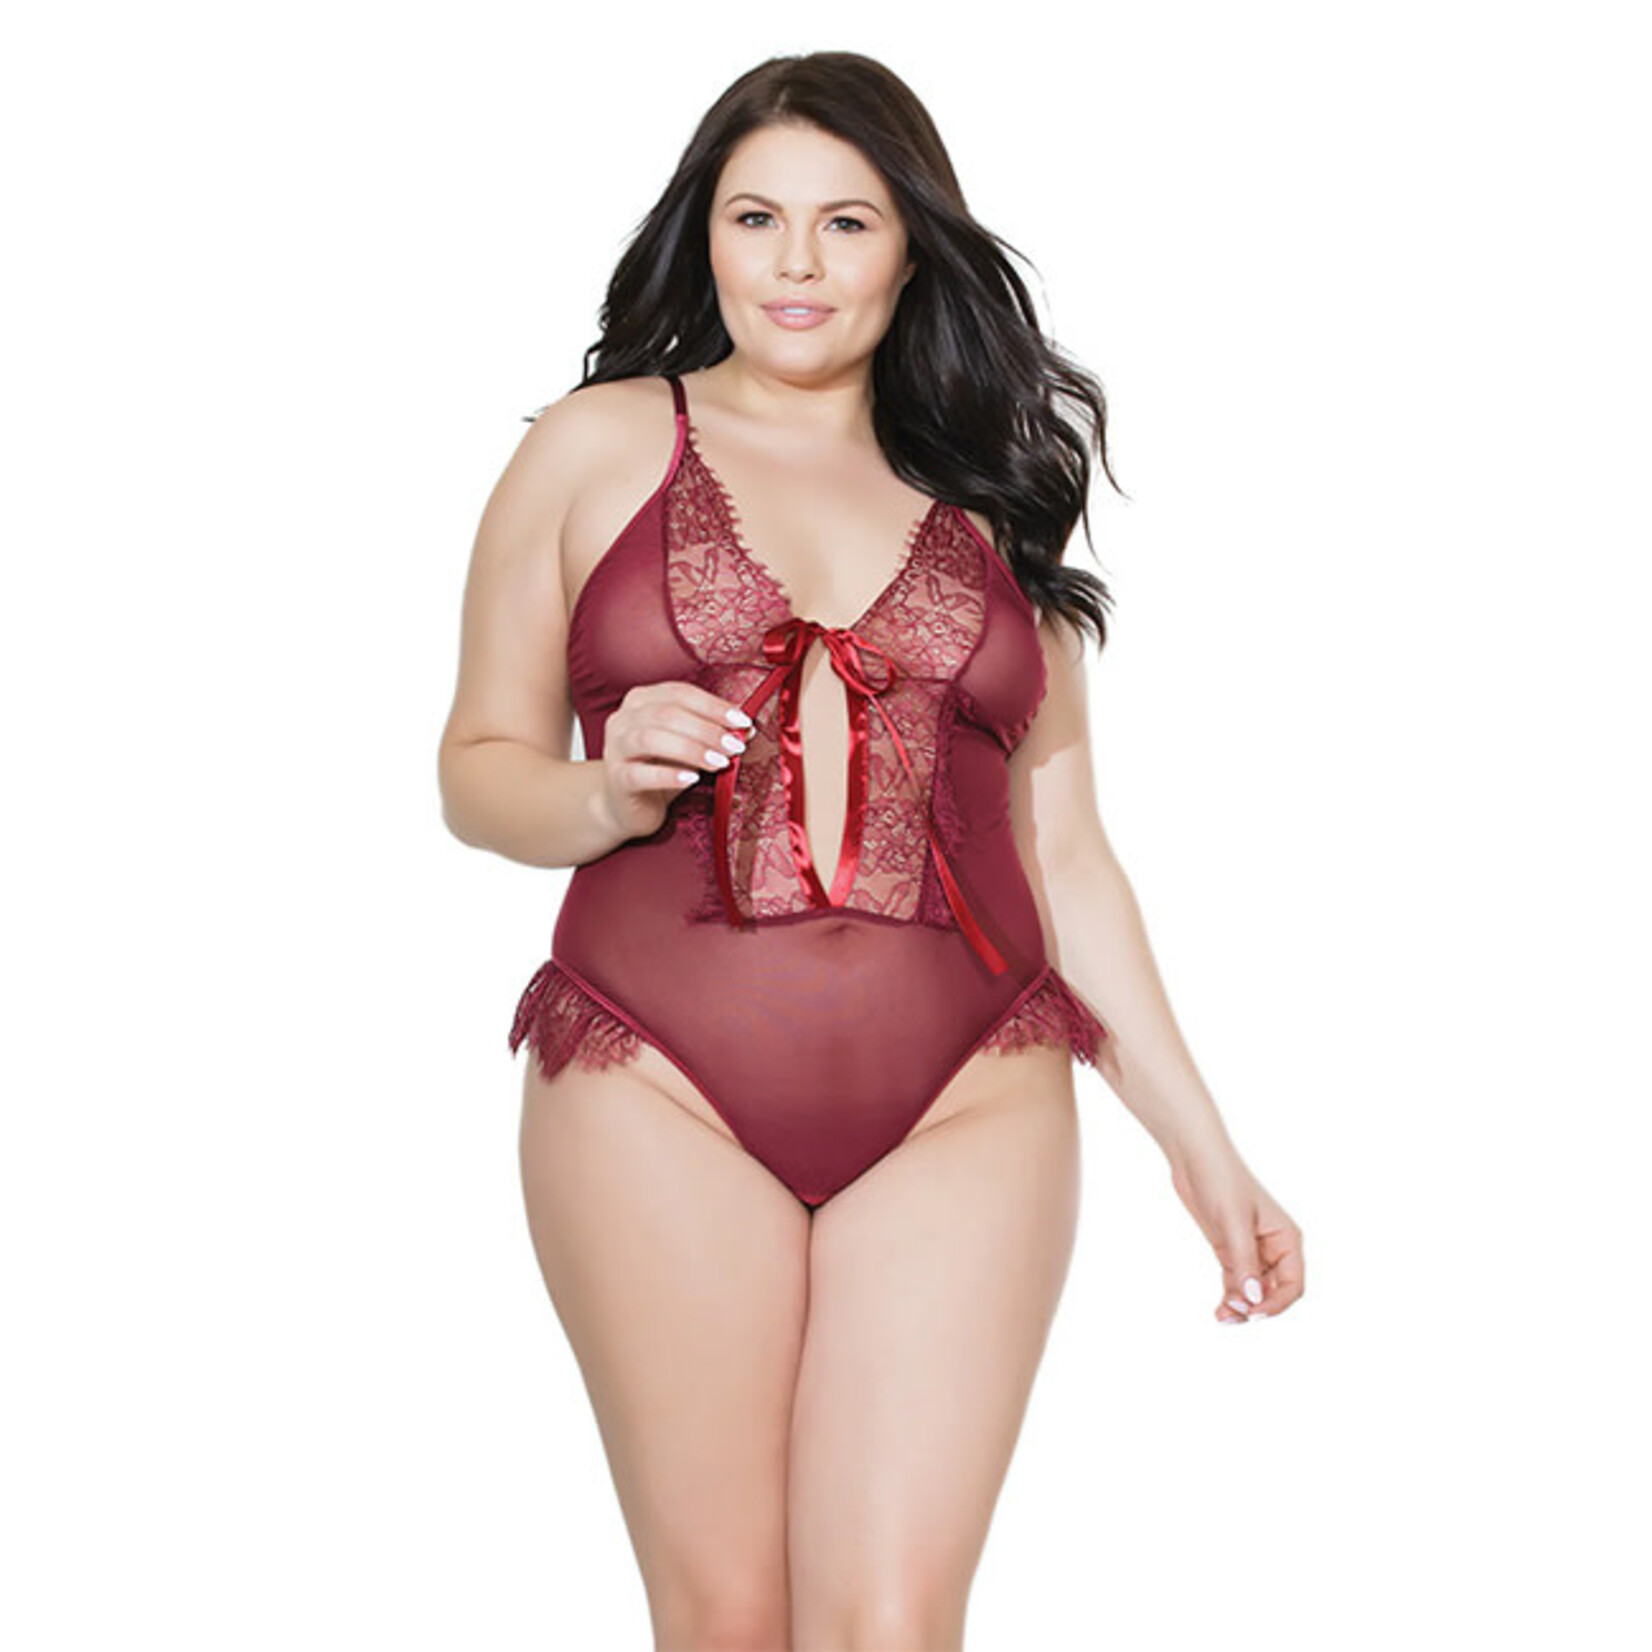 Coquette Coquette Merlot Crotchless Lace Ruffle Teddy